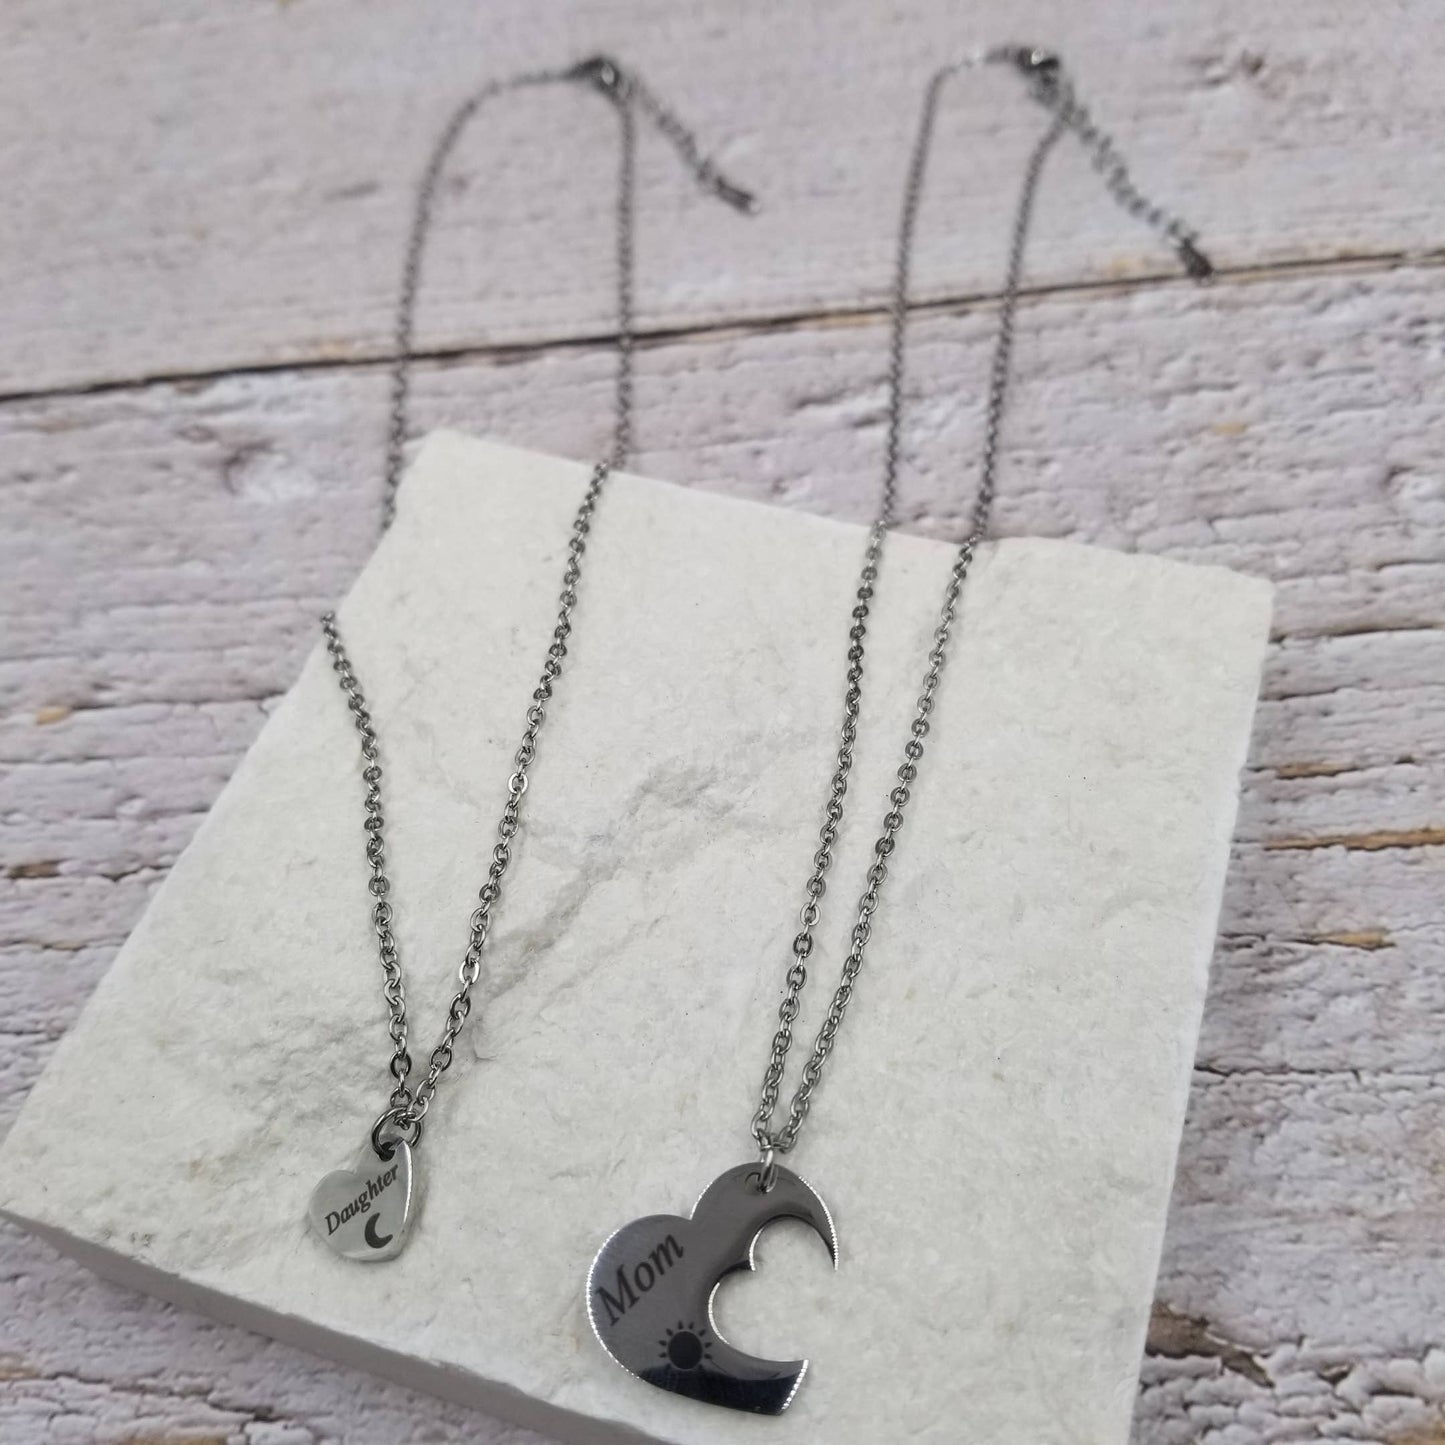 Sun & Moon Heart Necklace Set - Mother's Day Gift